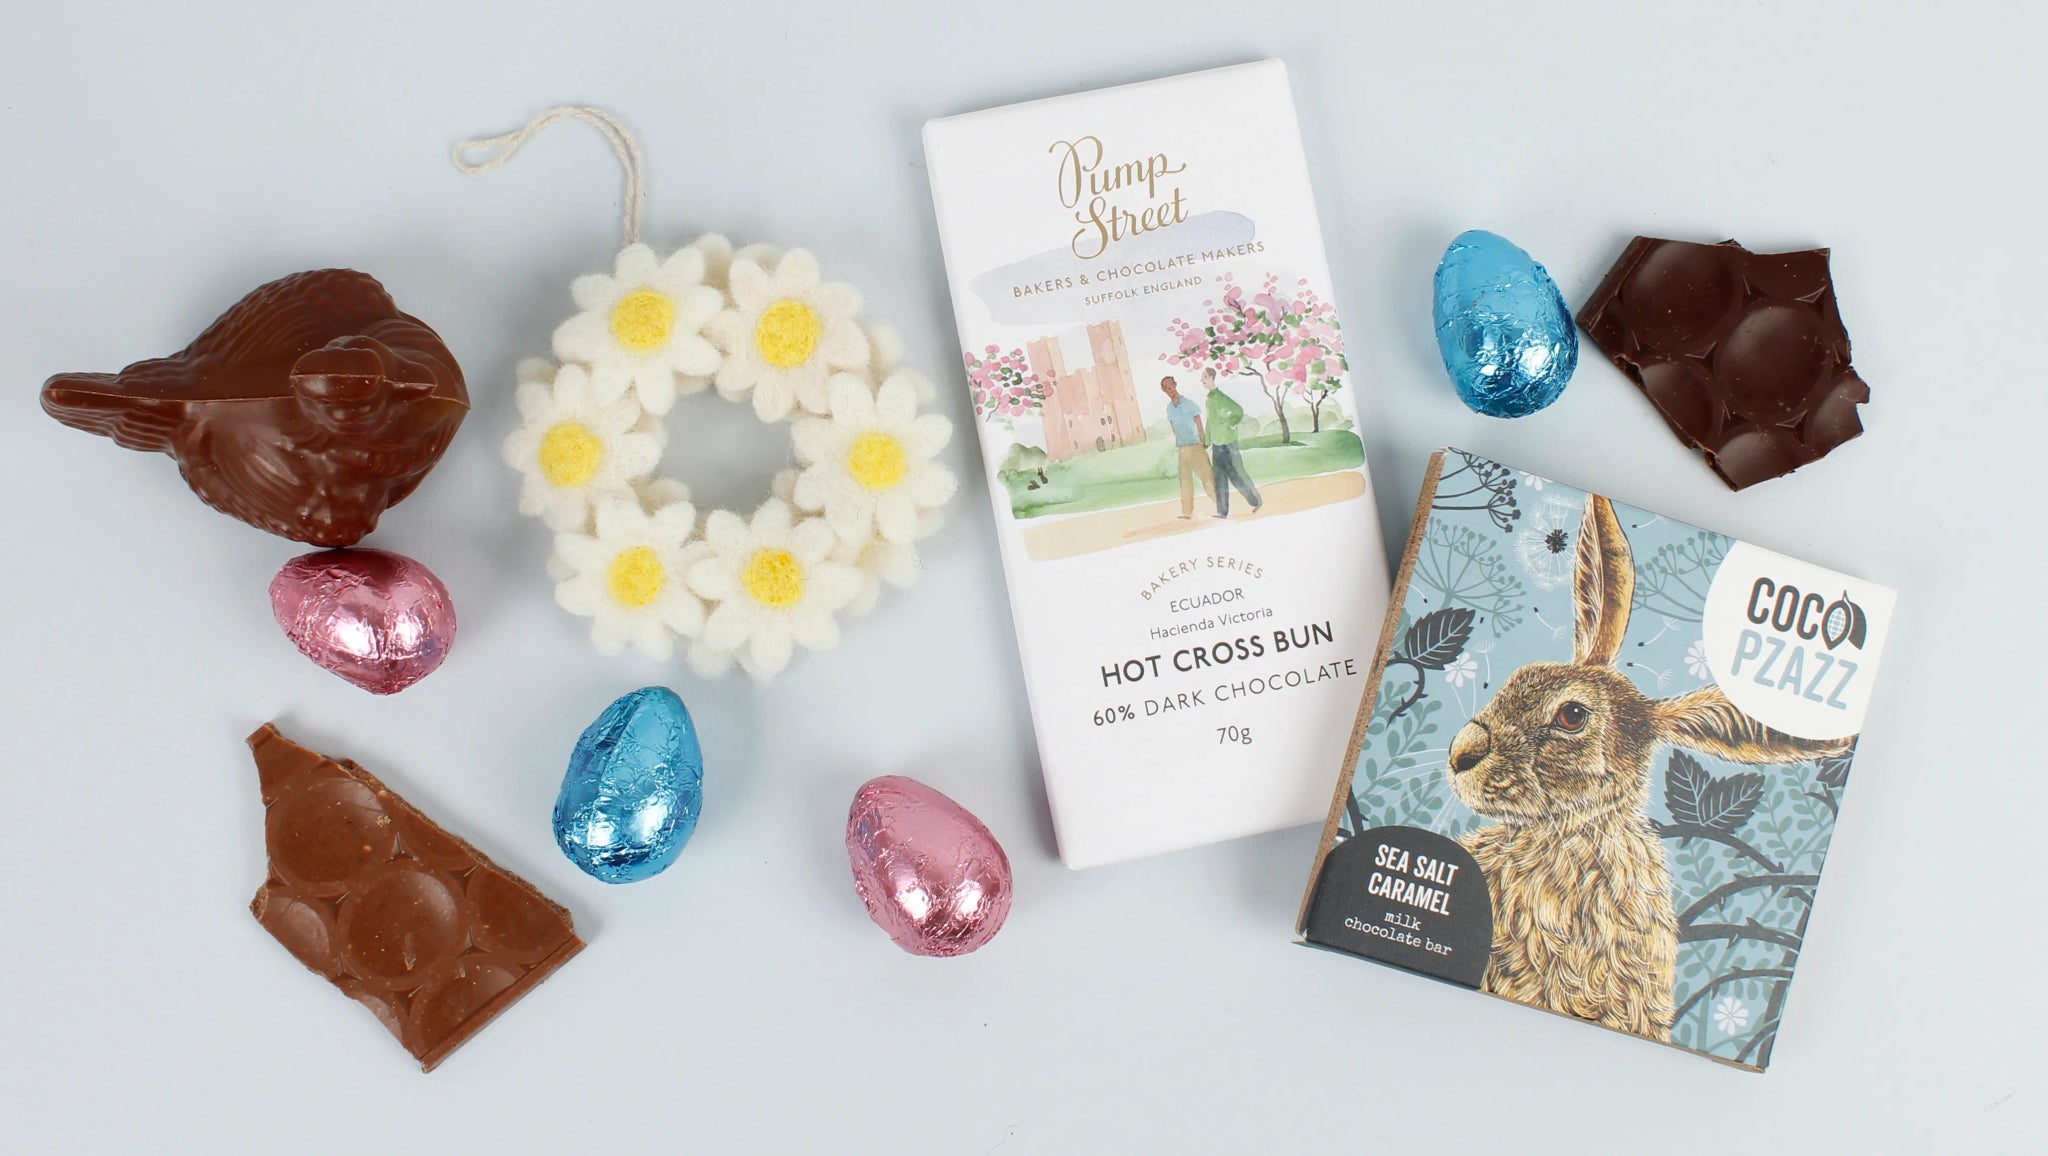 Ethical Easter Gifts, Chocolate & Decor - Green Tulip